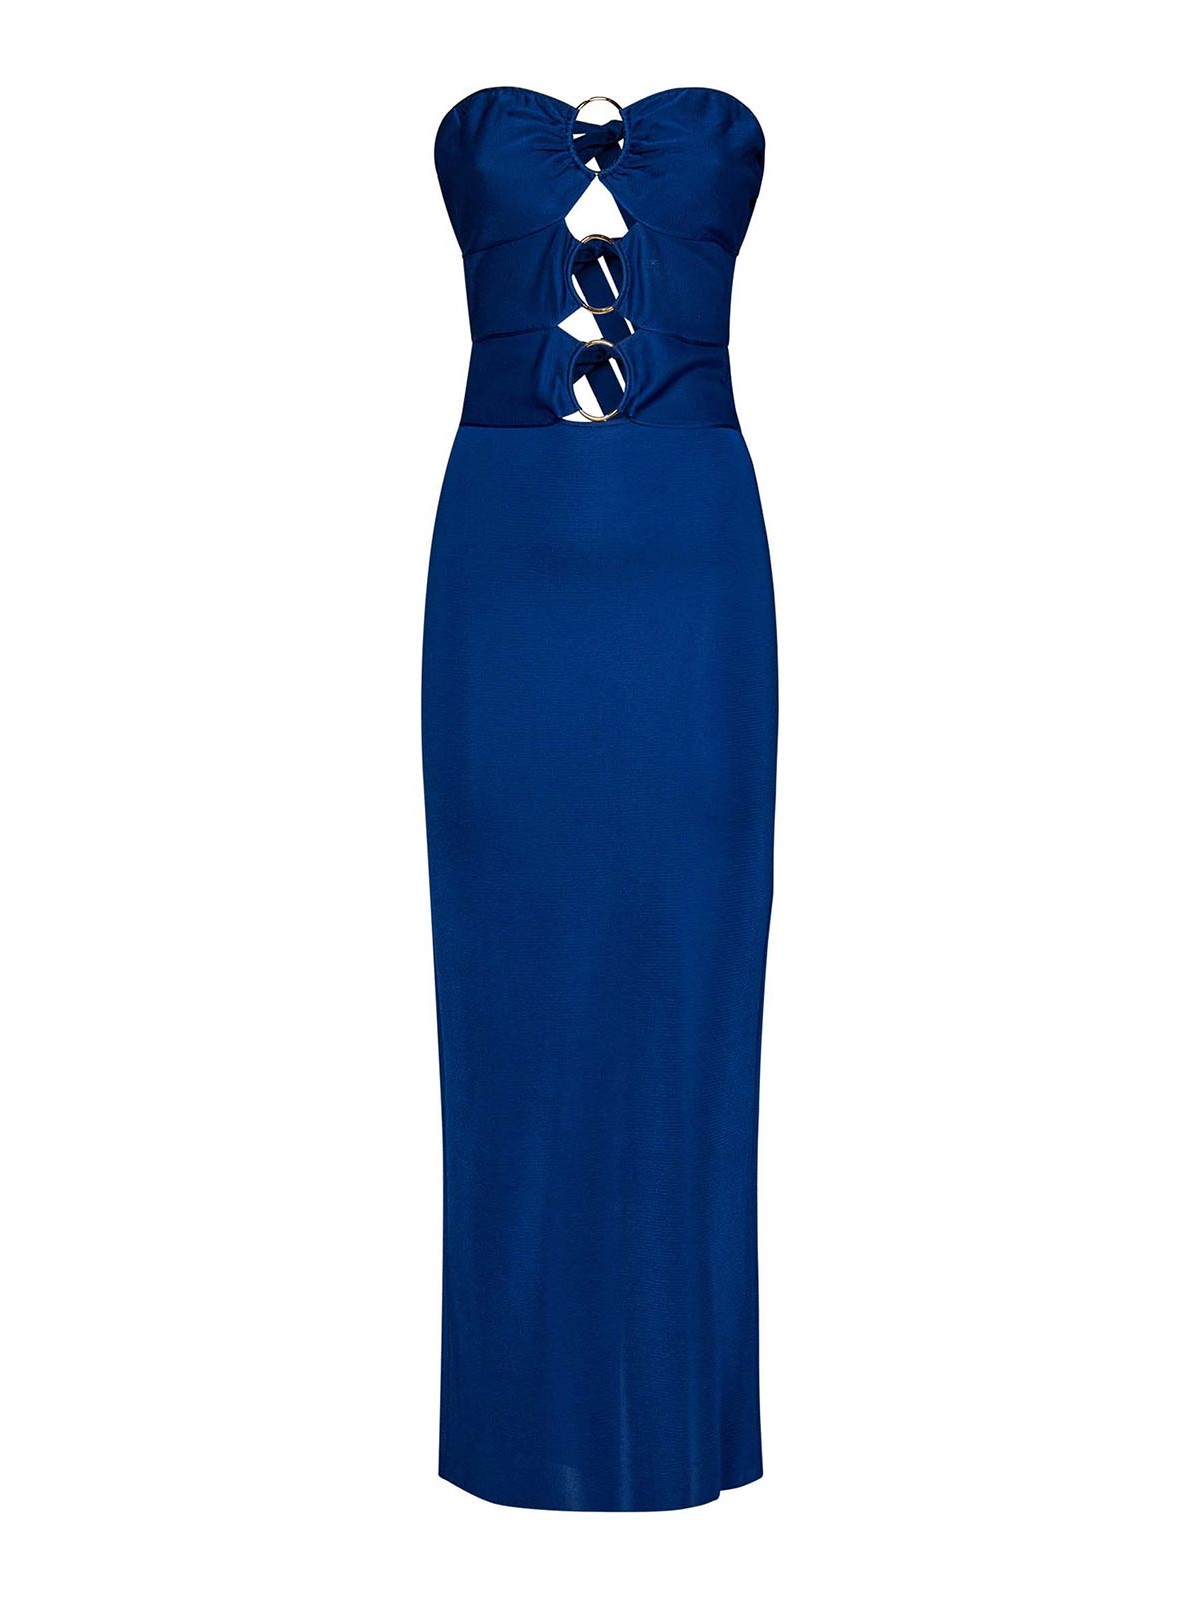 TOM FORD ELECTRIC BLUE STRAPLESS DRESS